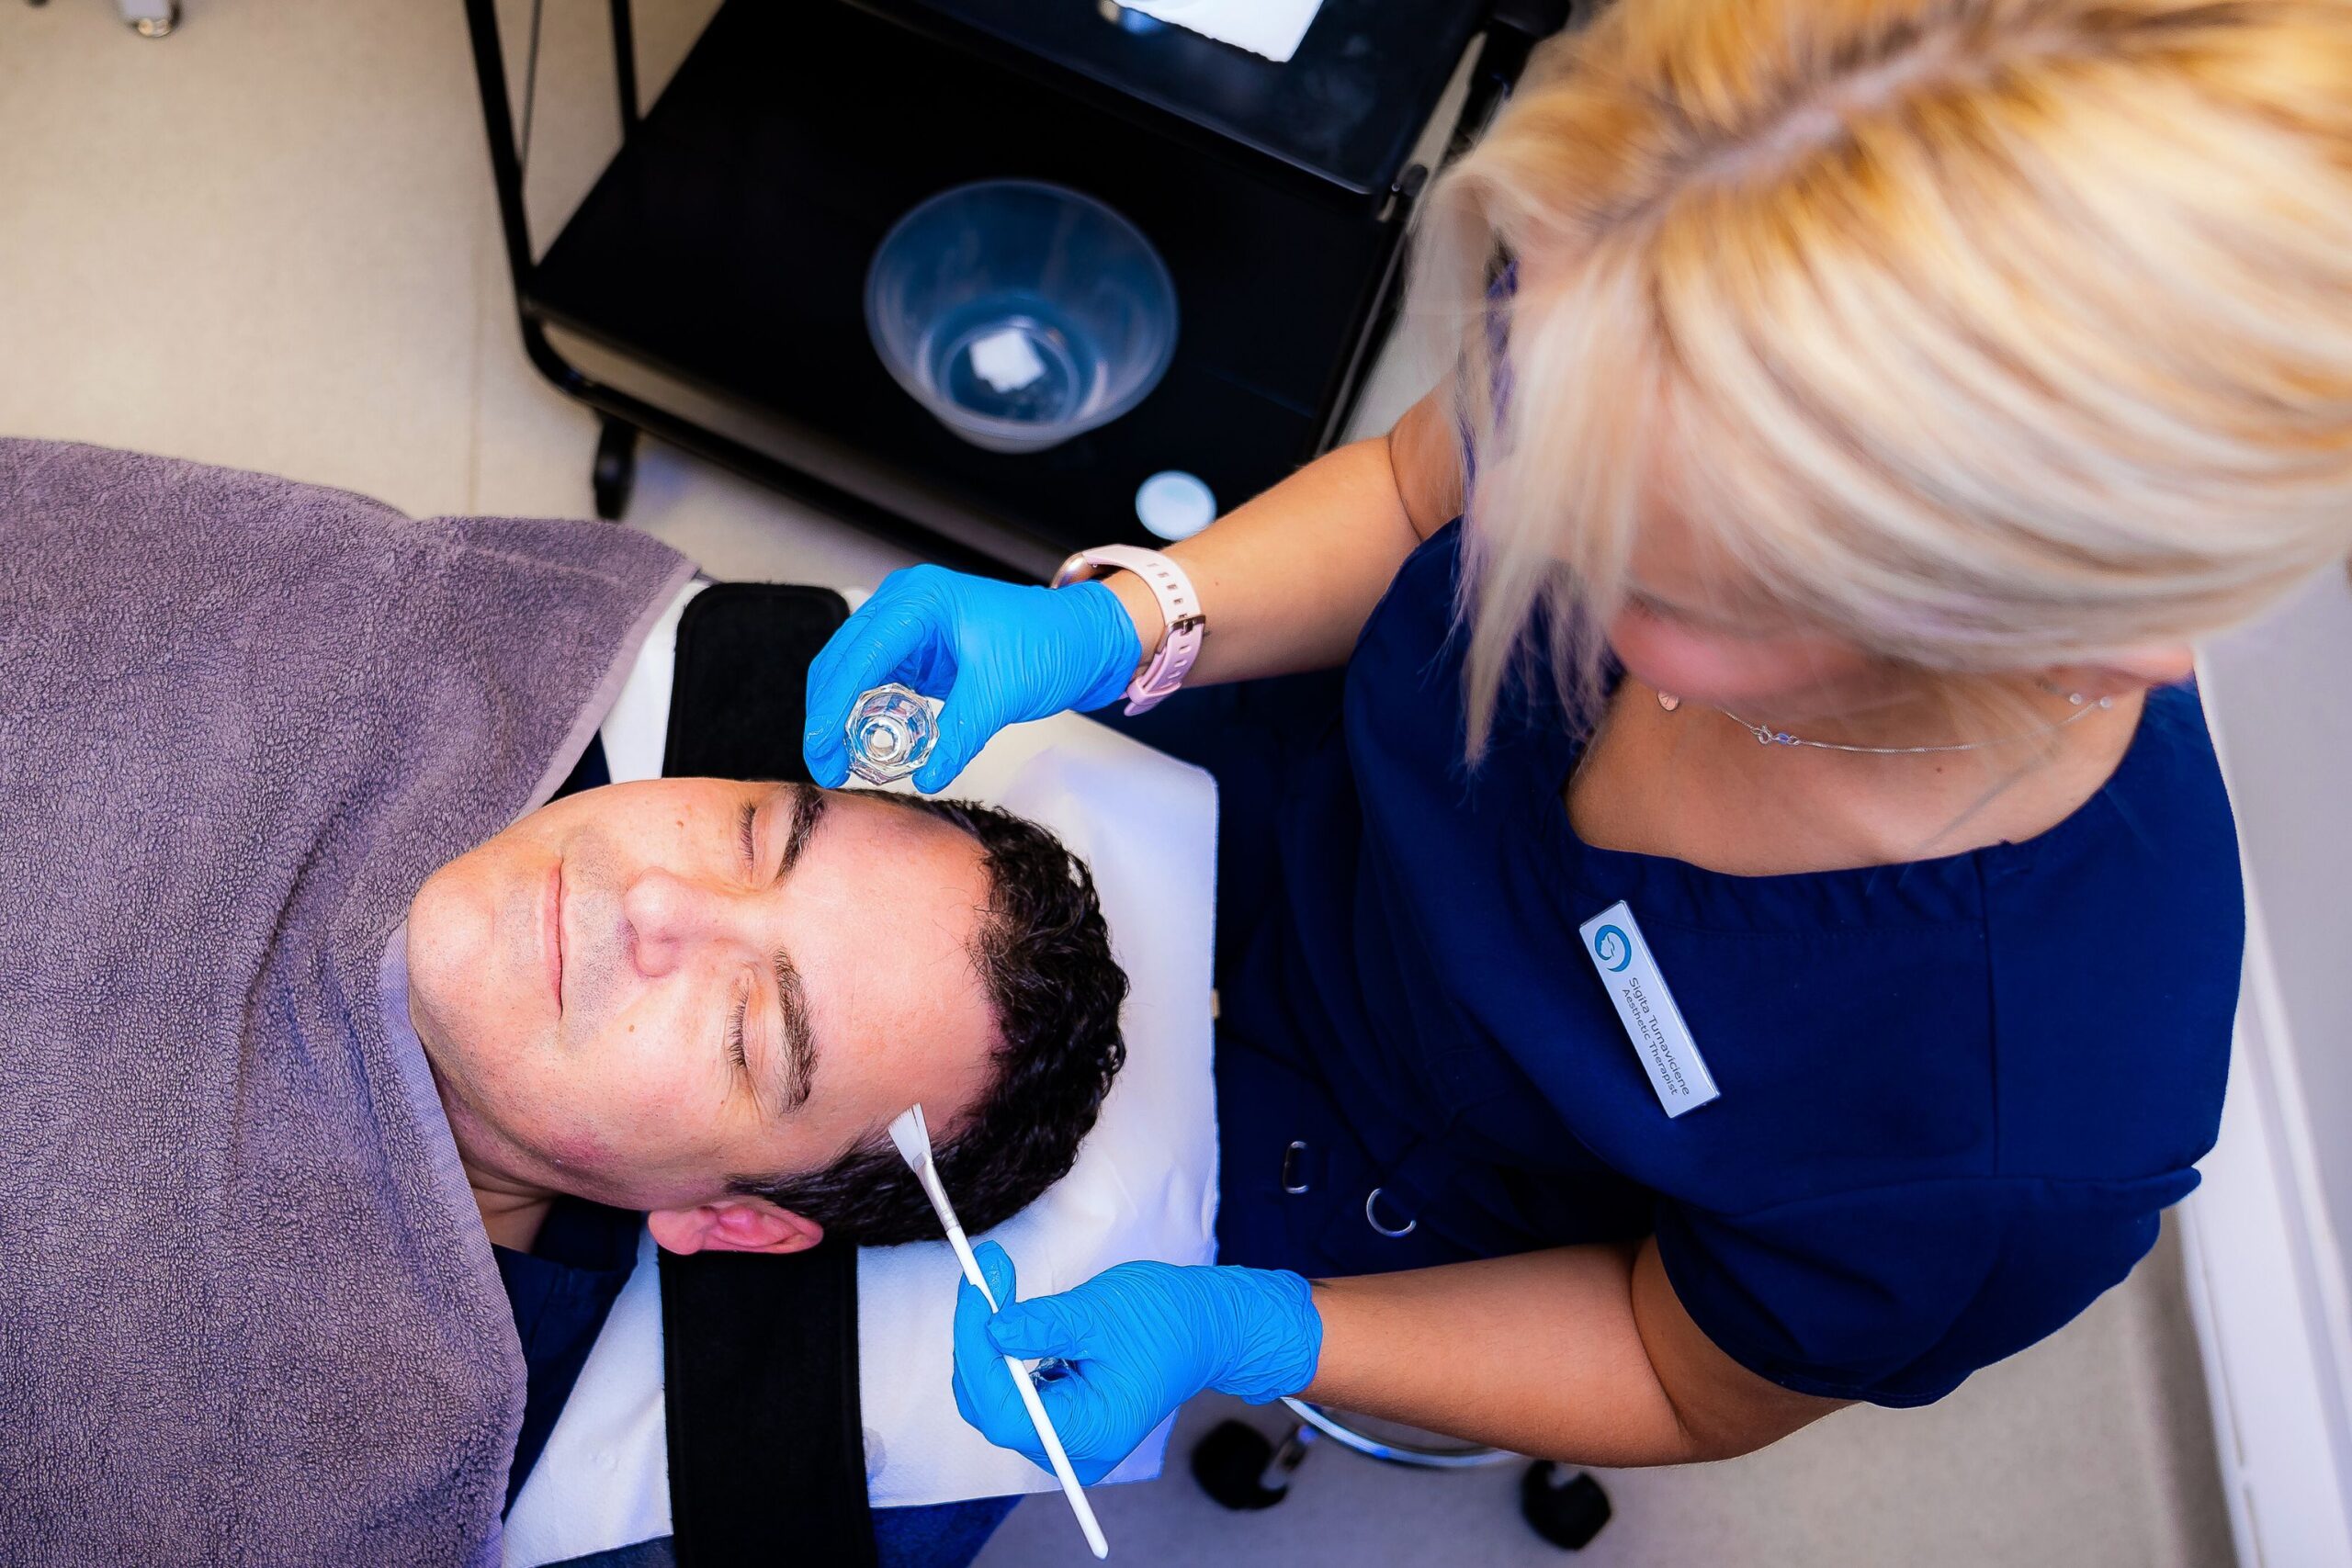 Chemical Peels at Freyja Medical in Wrexham, Nantwich and Cheshire